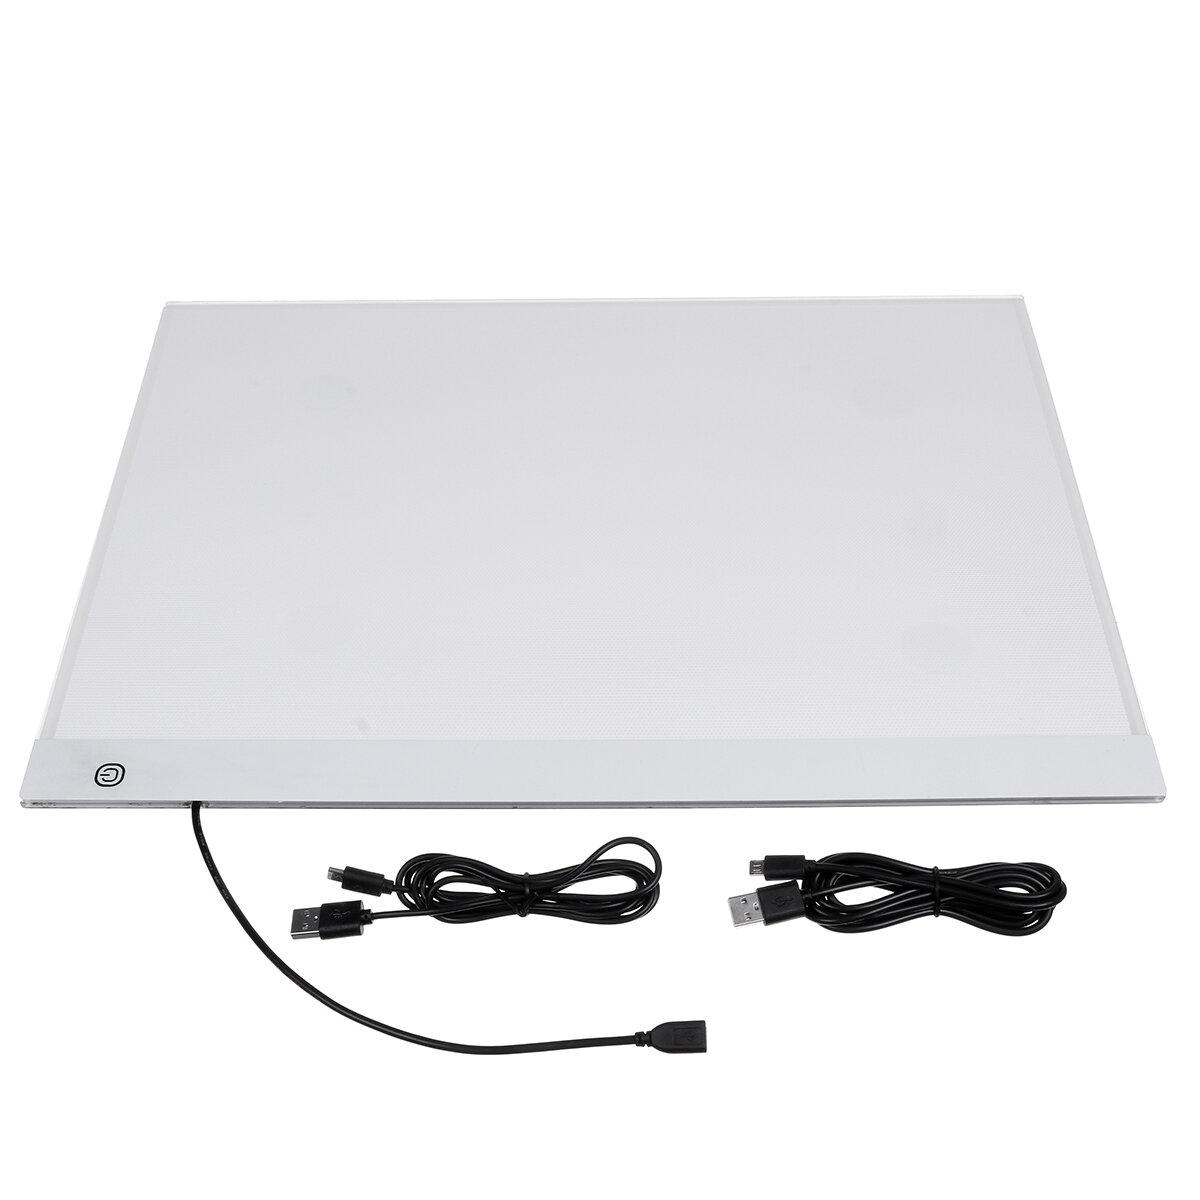 

A3 LED Drawing Digital Graphics Tablet Ultra Thin USB LED Light Pad Copy Board Electronic Art Painting Writing Tablet